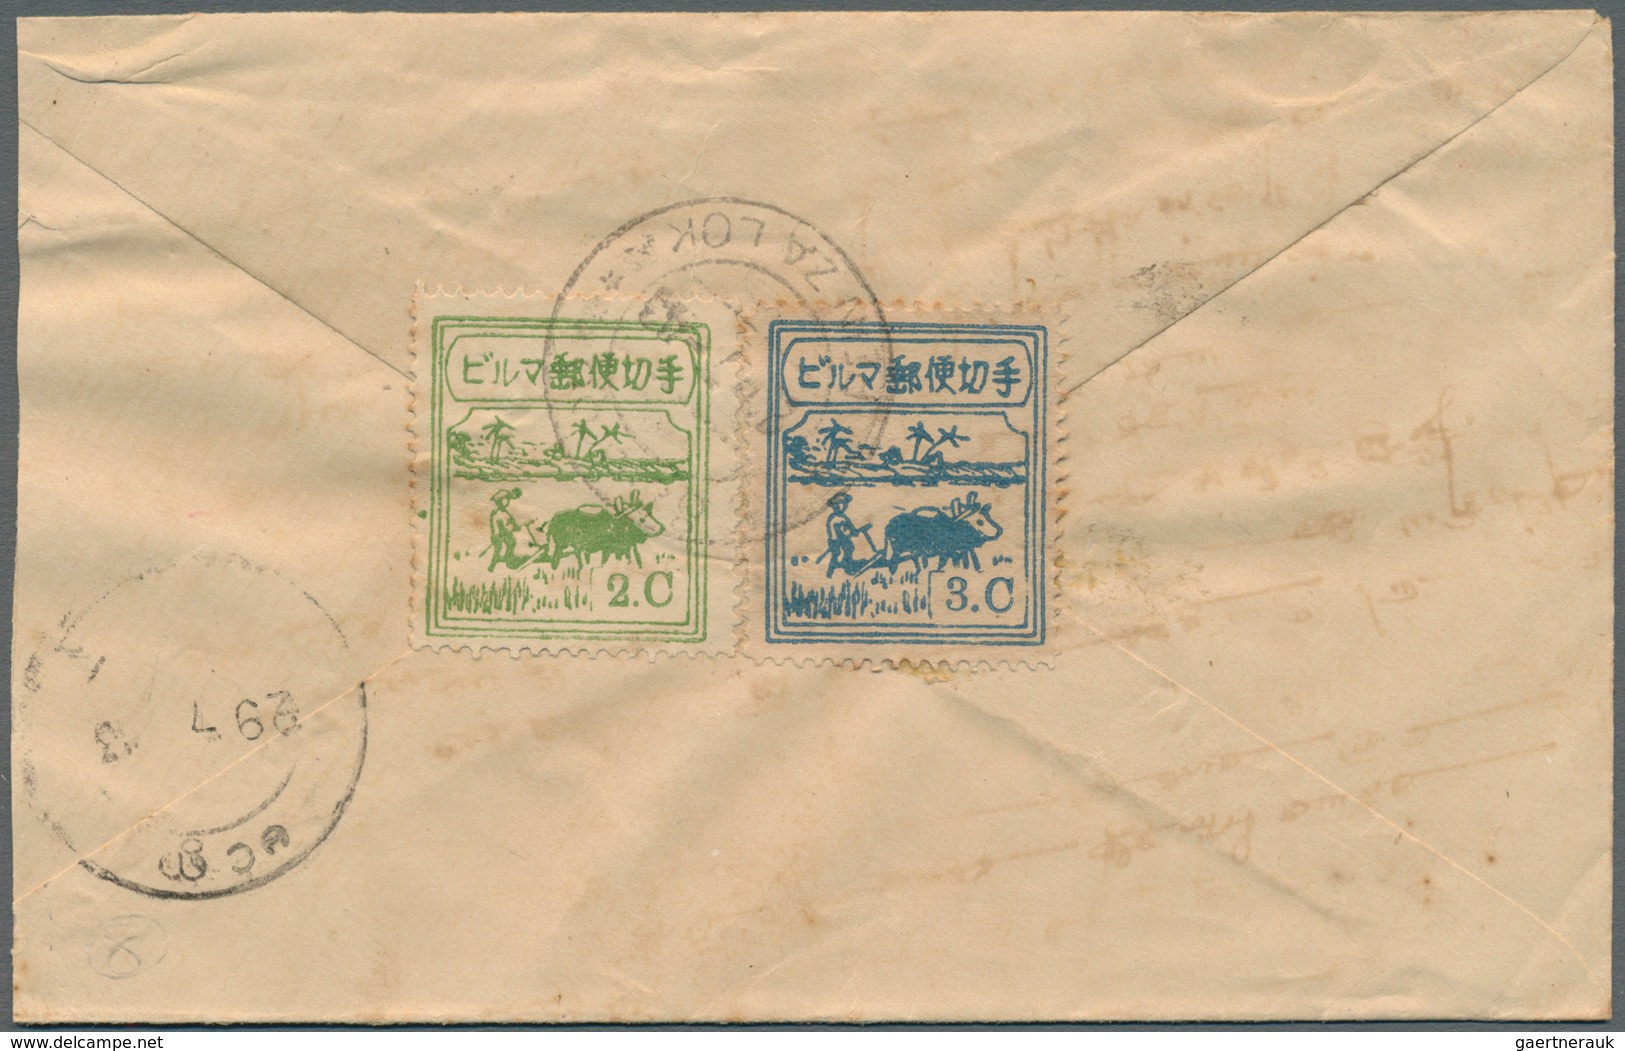 Japan: 1902/1948: Very fine lot of 22 envelopes, picture postcards and postal stationeries including